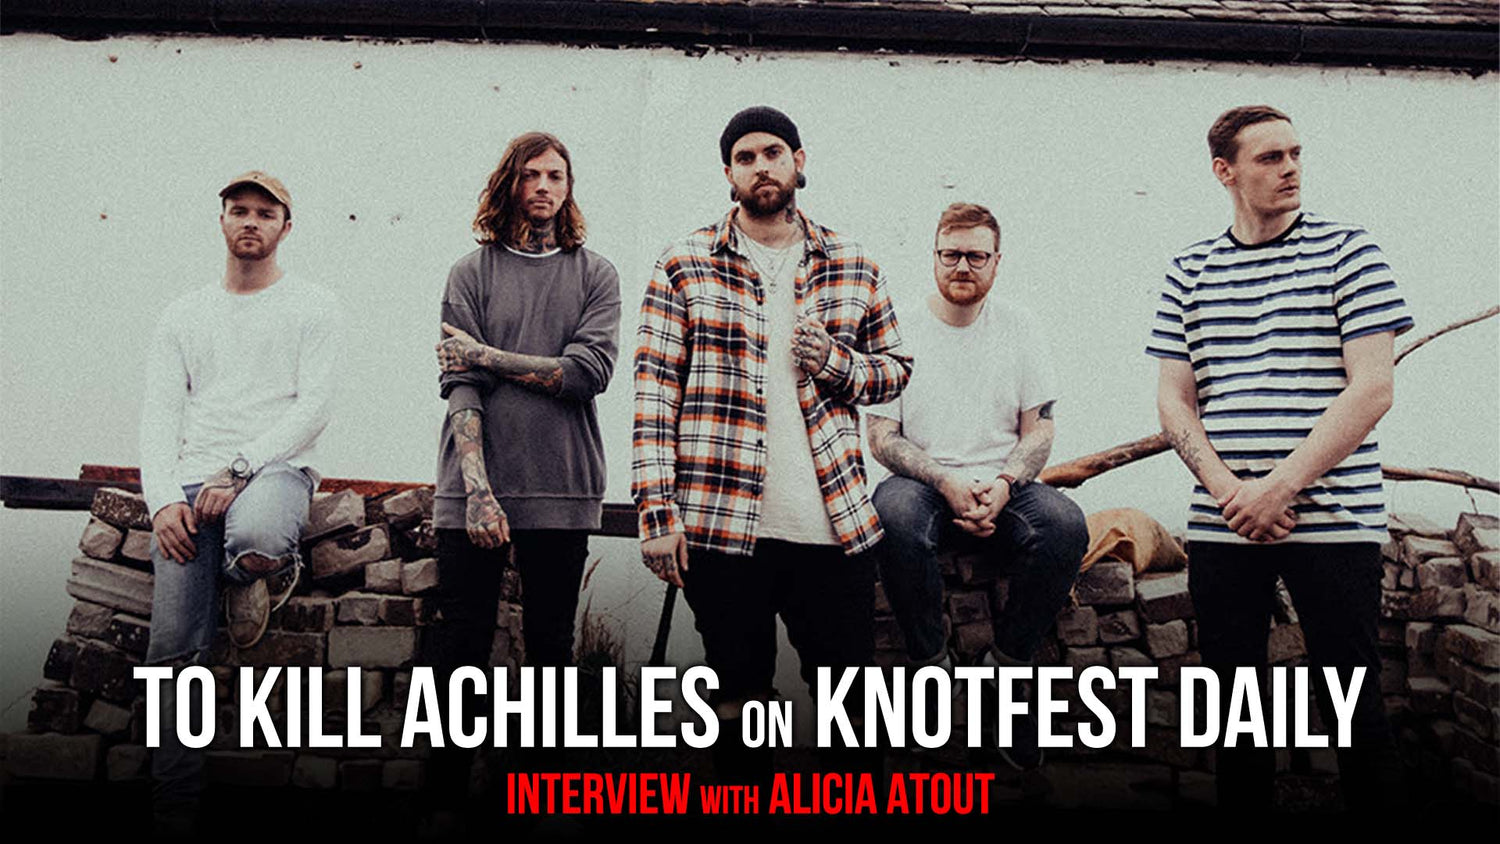 To Kill Achilles: Writing Sad Songs & the Fans Who Connect Deeply with Them